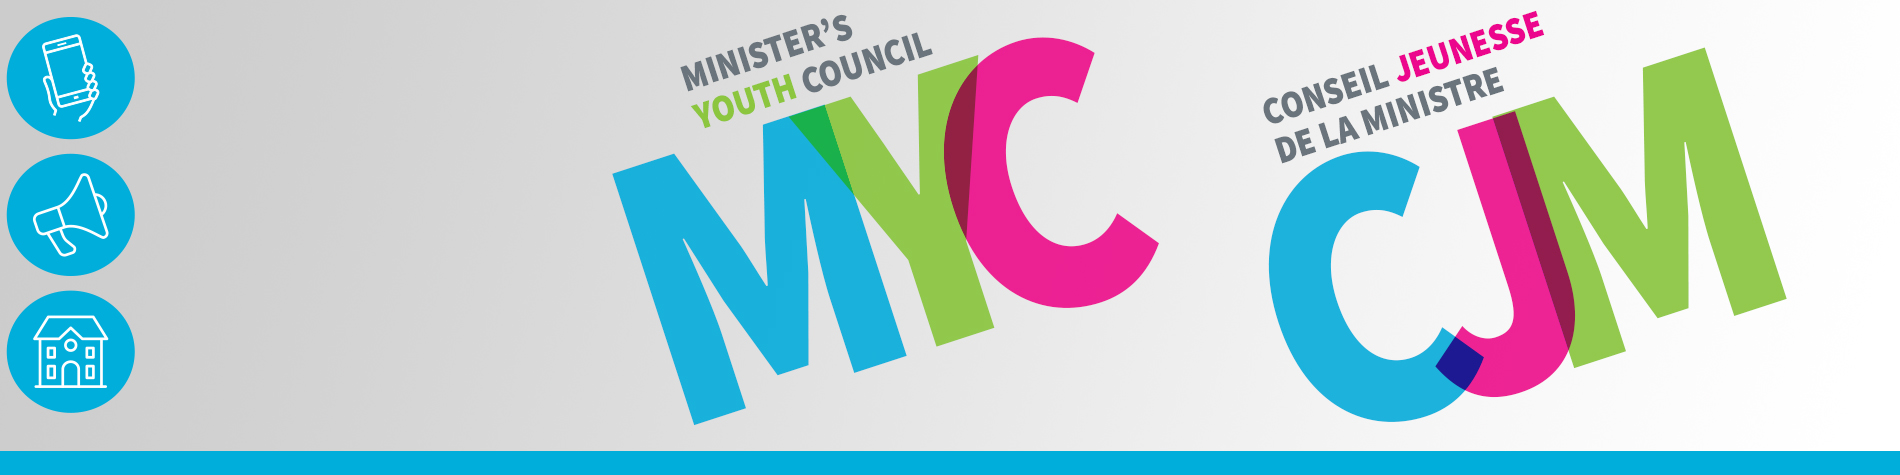 <p class="slider-title">If You Could Talk to the Minister of Education, What Would You Say?</p><div class="banner-line"></div><p class="slider-subtitle">Apply before March 24 for the 2023-24 Minister’s Youth Council</p> <a style="pointer-events:all" class=AEBannerMoreLink href="https://www.cbe.ab.ca/news-centre/Pages/if-you-could-talk-to-the-minister-of-education-2023.aspx">Read More</a>